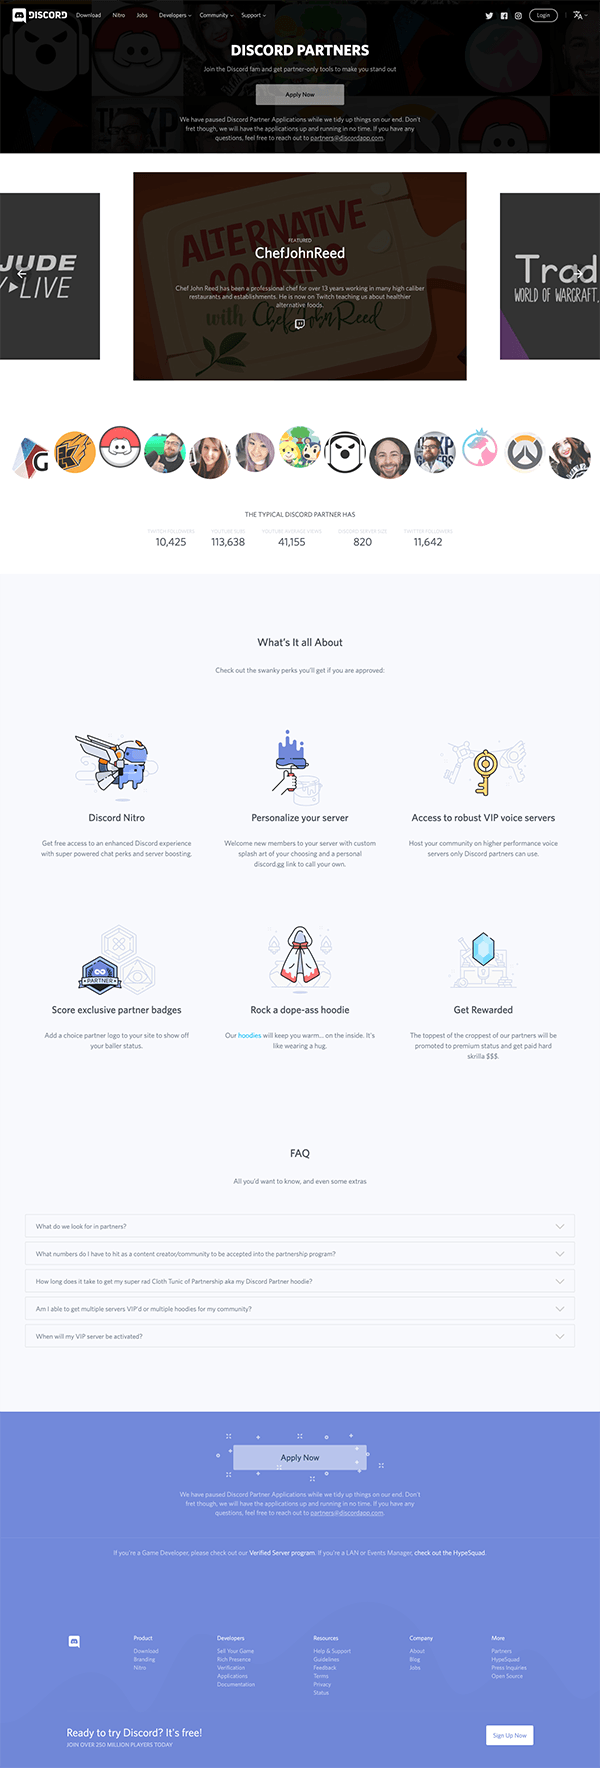 Screenshot of Discord's partners page